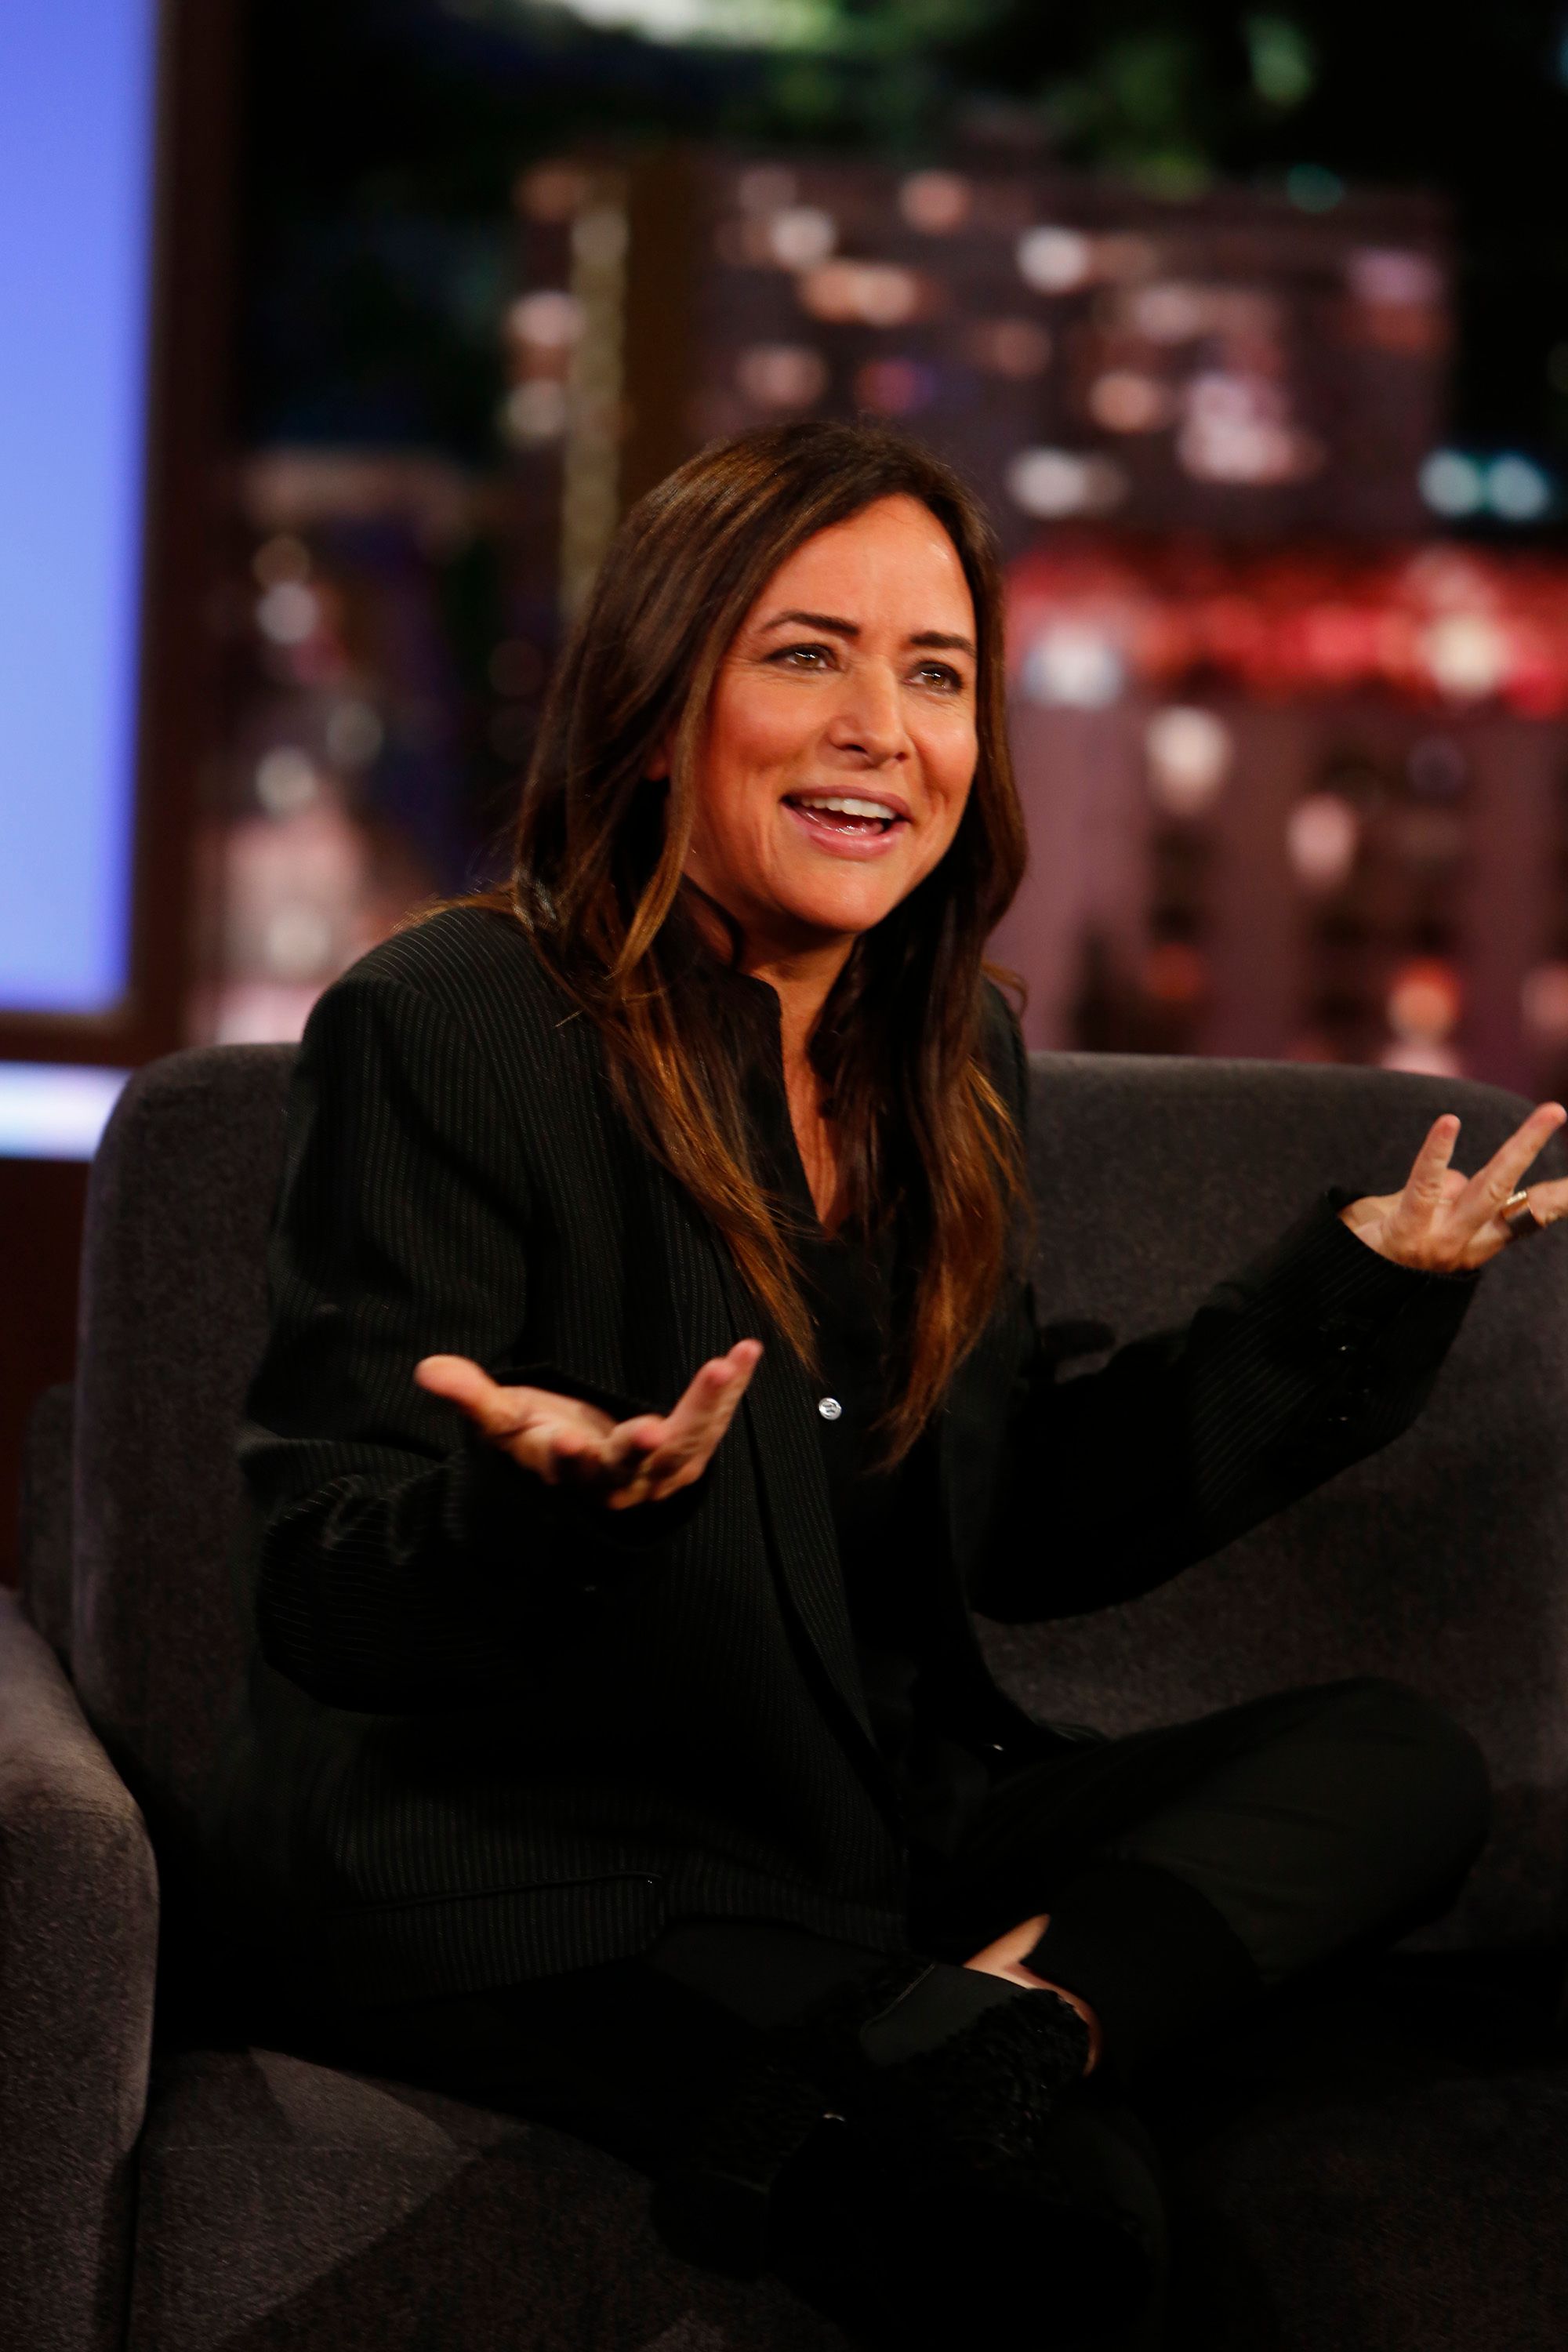 Pamela Adlon on "Jimmy Kimmel Live" in May 2018 in New York City | SOurce: Getty Images